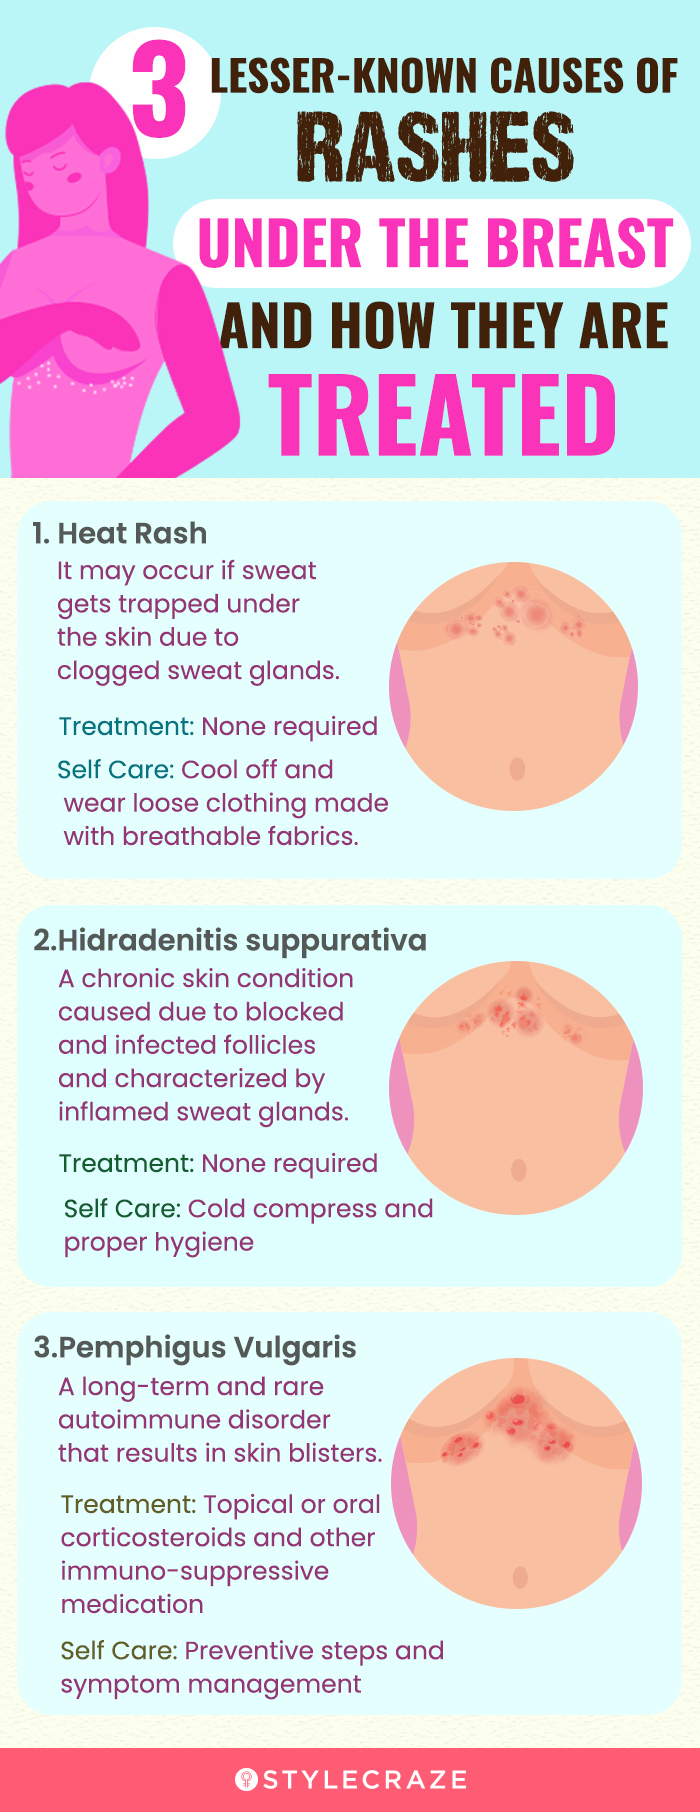 lesser known causes of rashes under the breast and how they are treated [infographic]